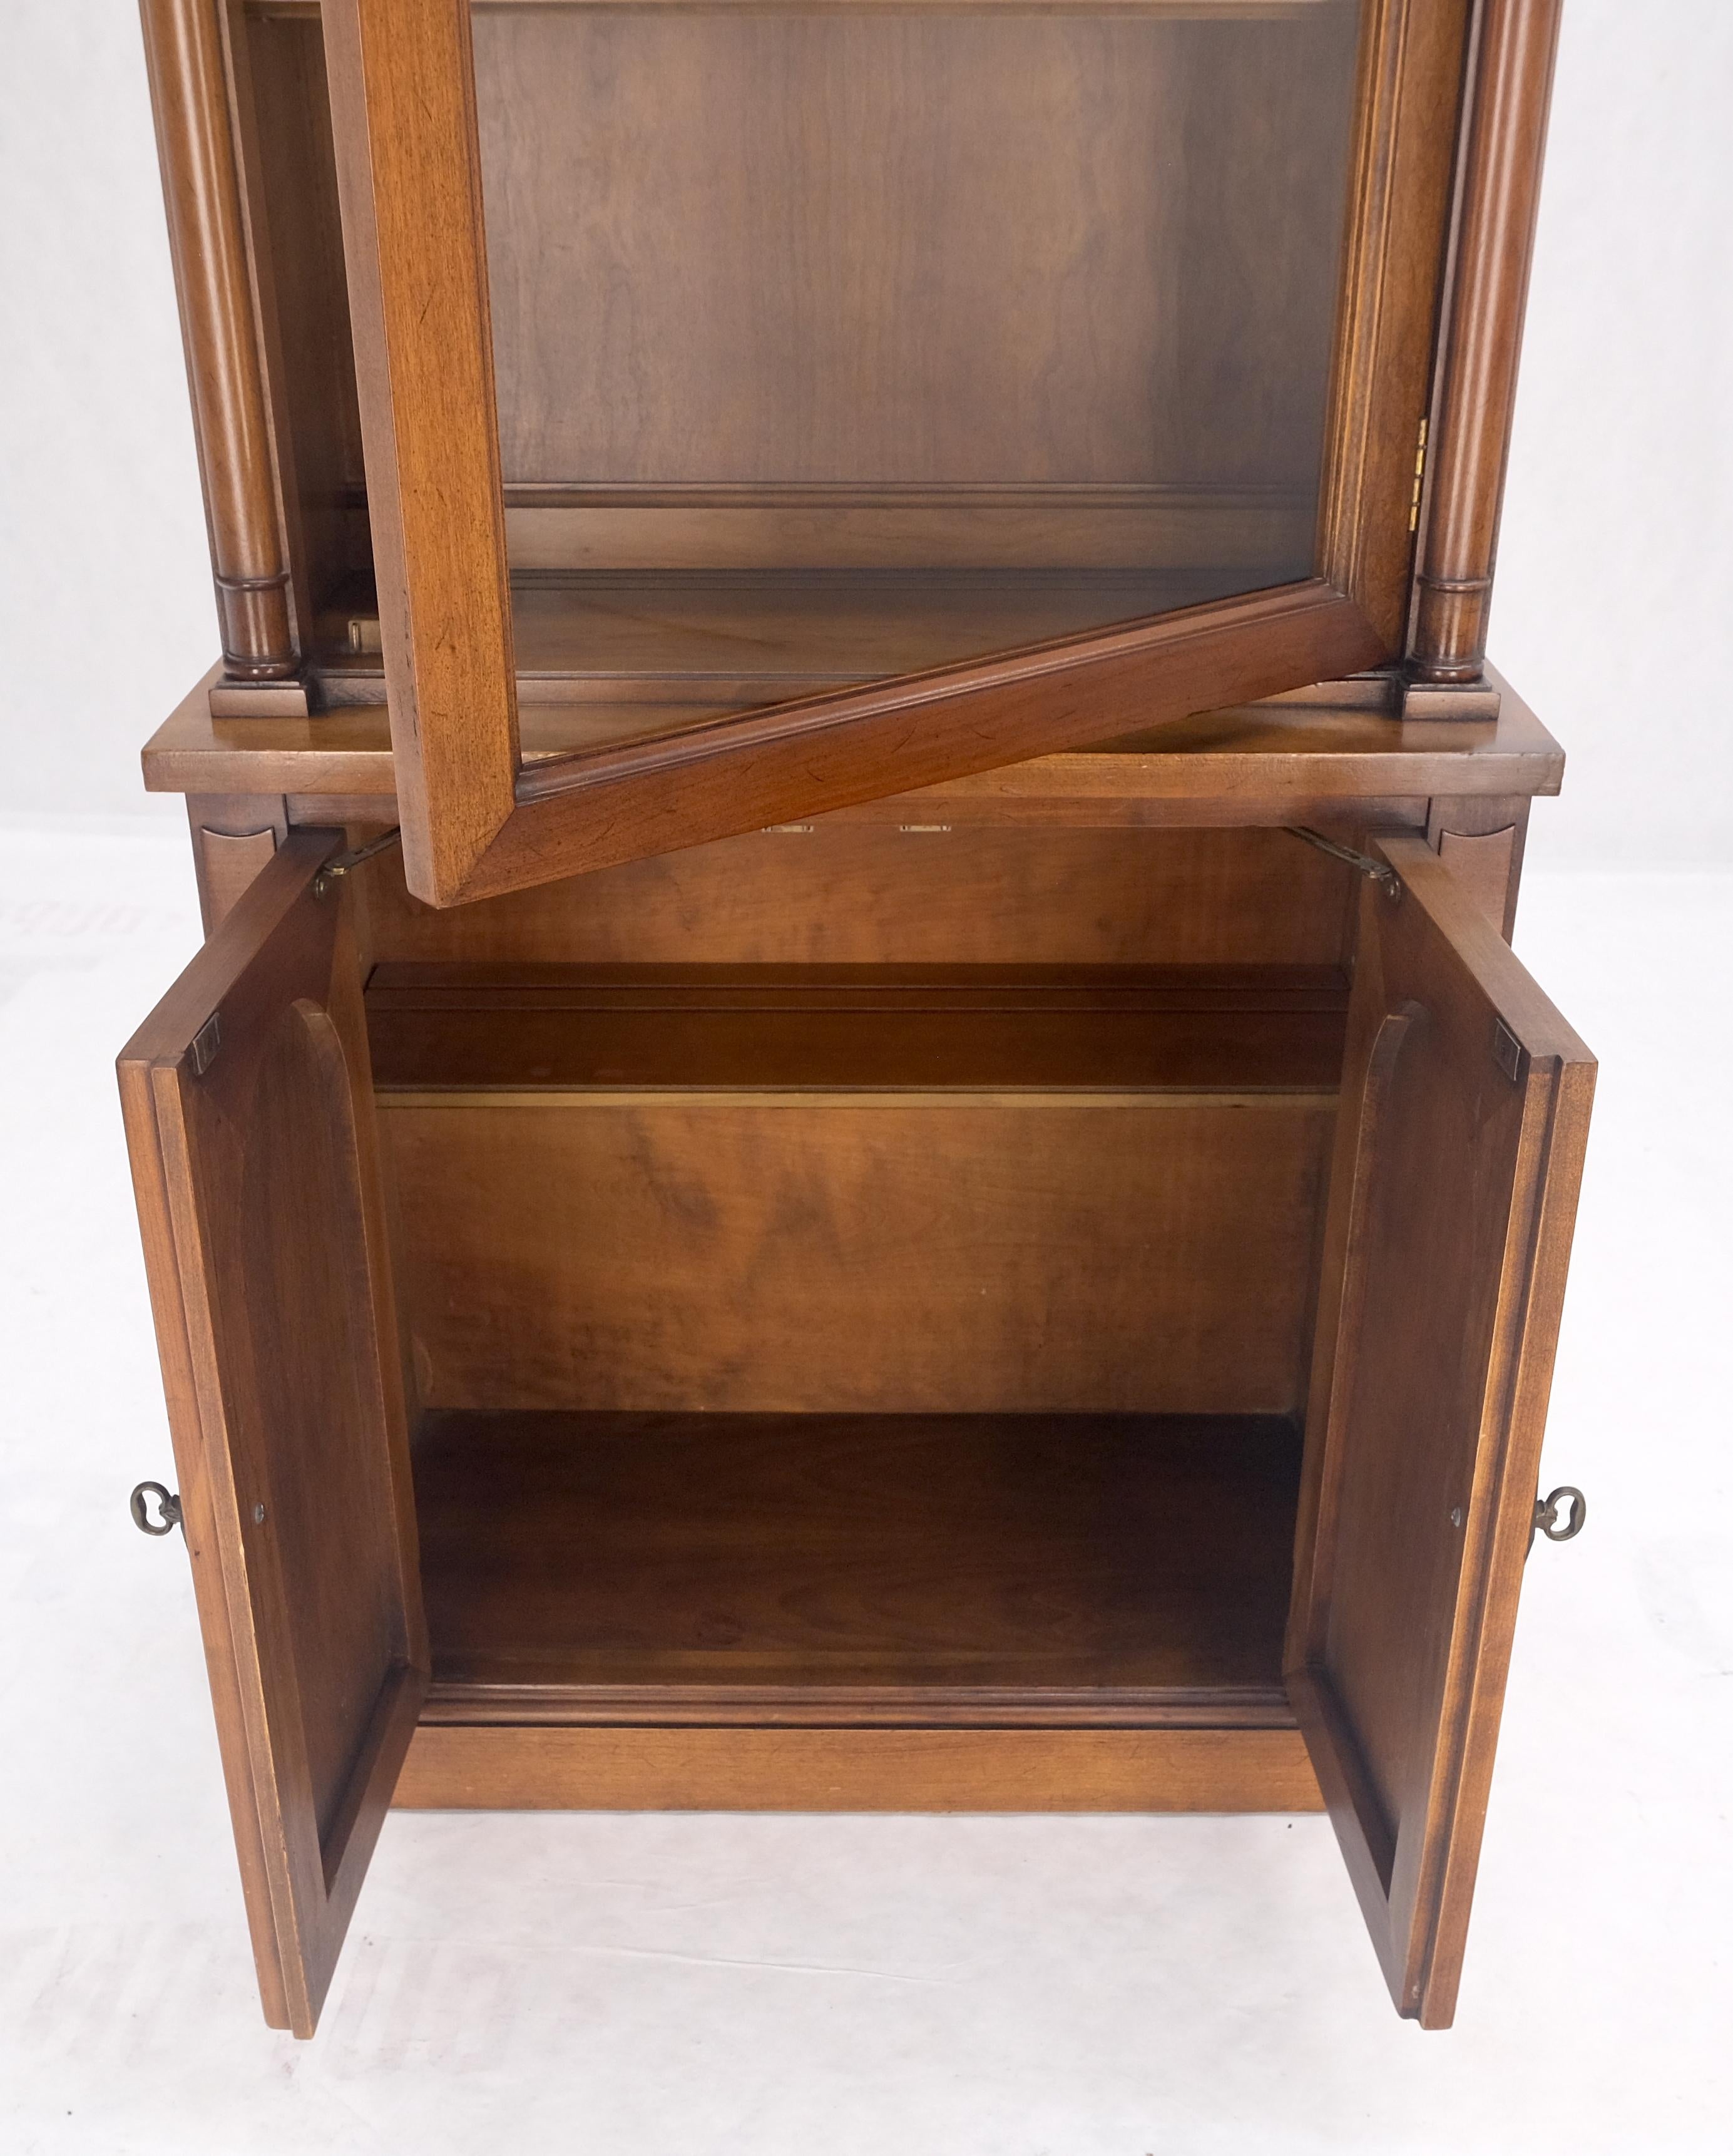 American Single Glass Door Solid Cherry Tall Bookcase Cupboard Bottom Compartment MINT! For Sale